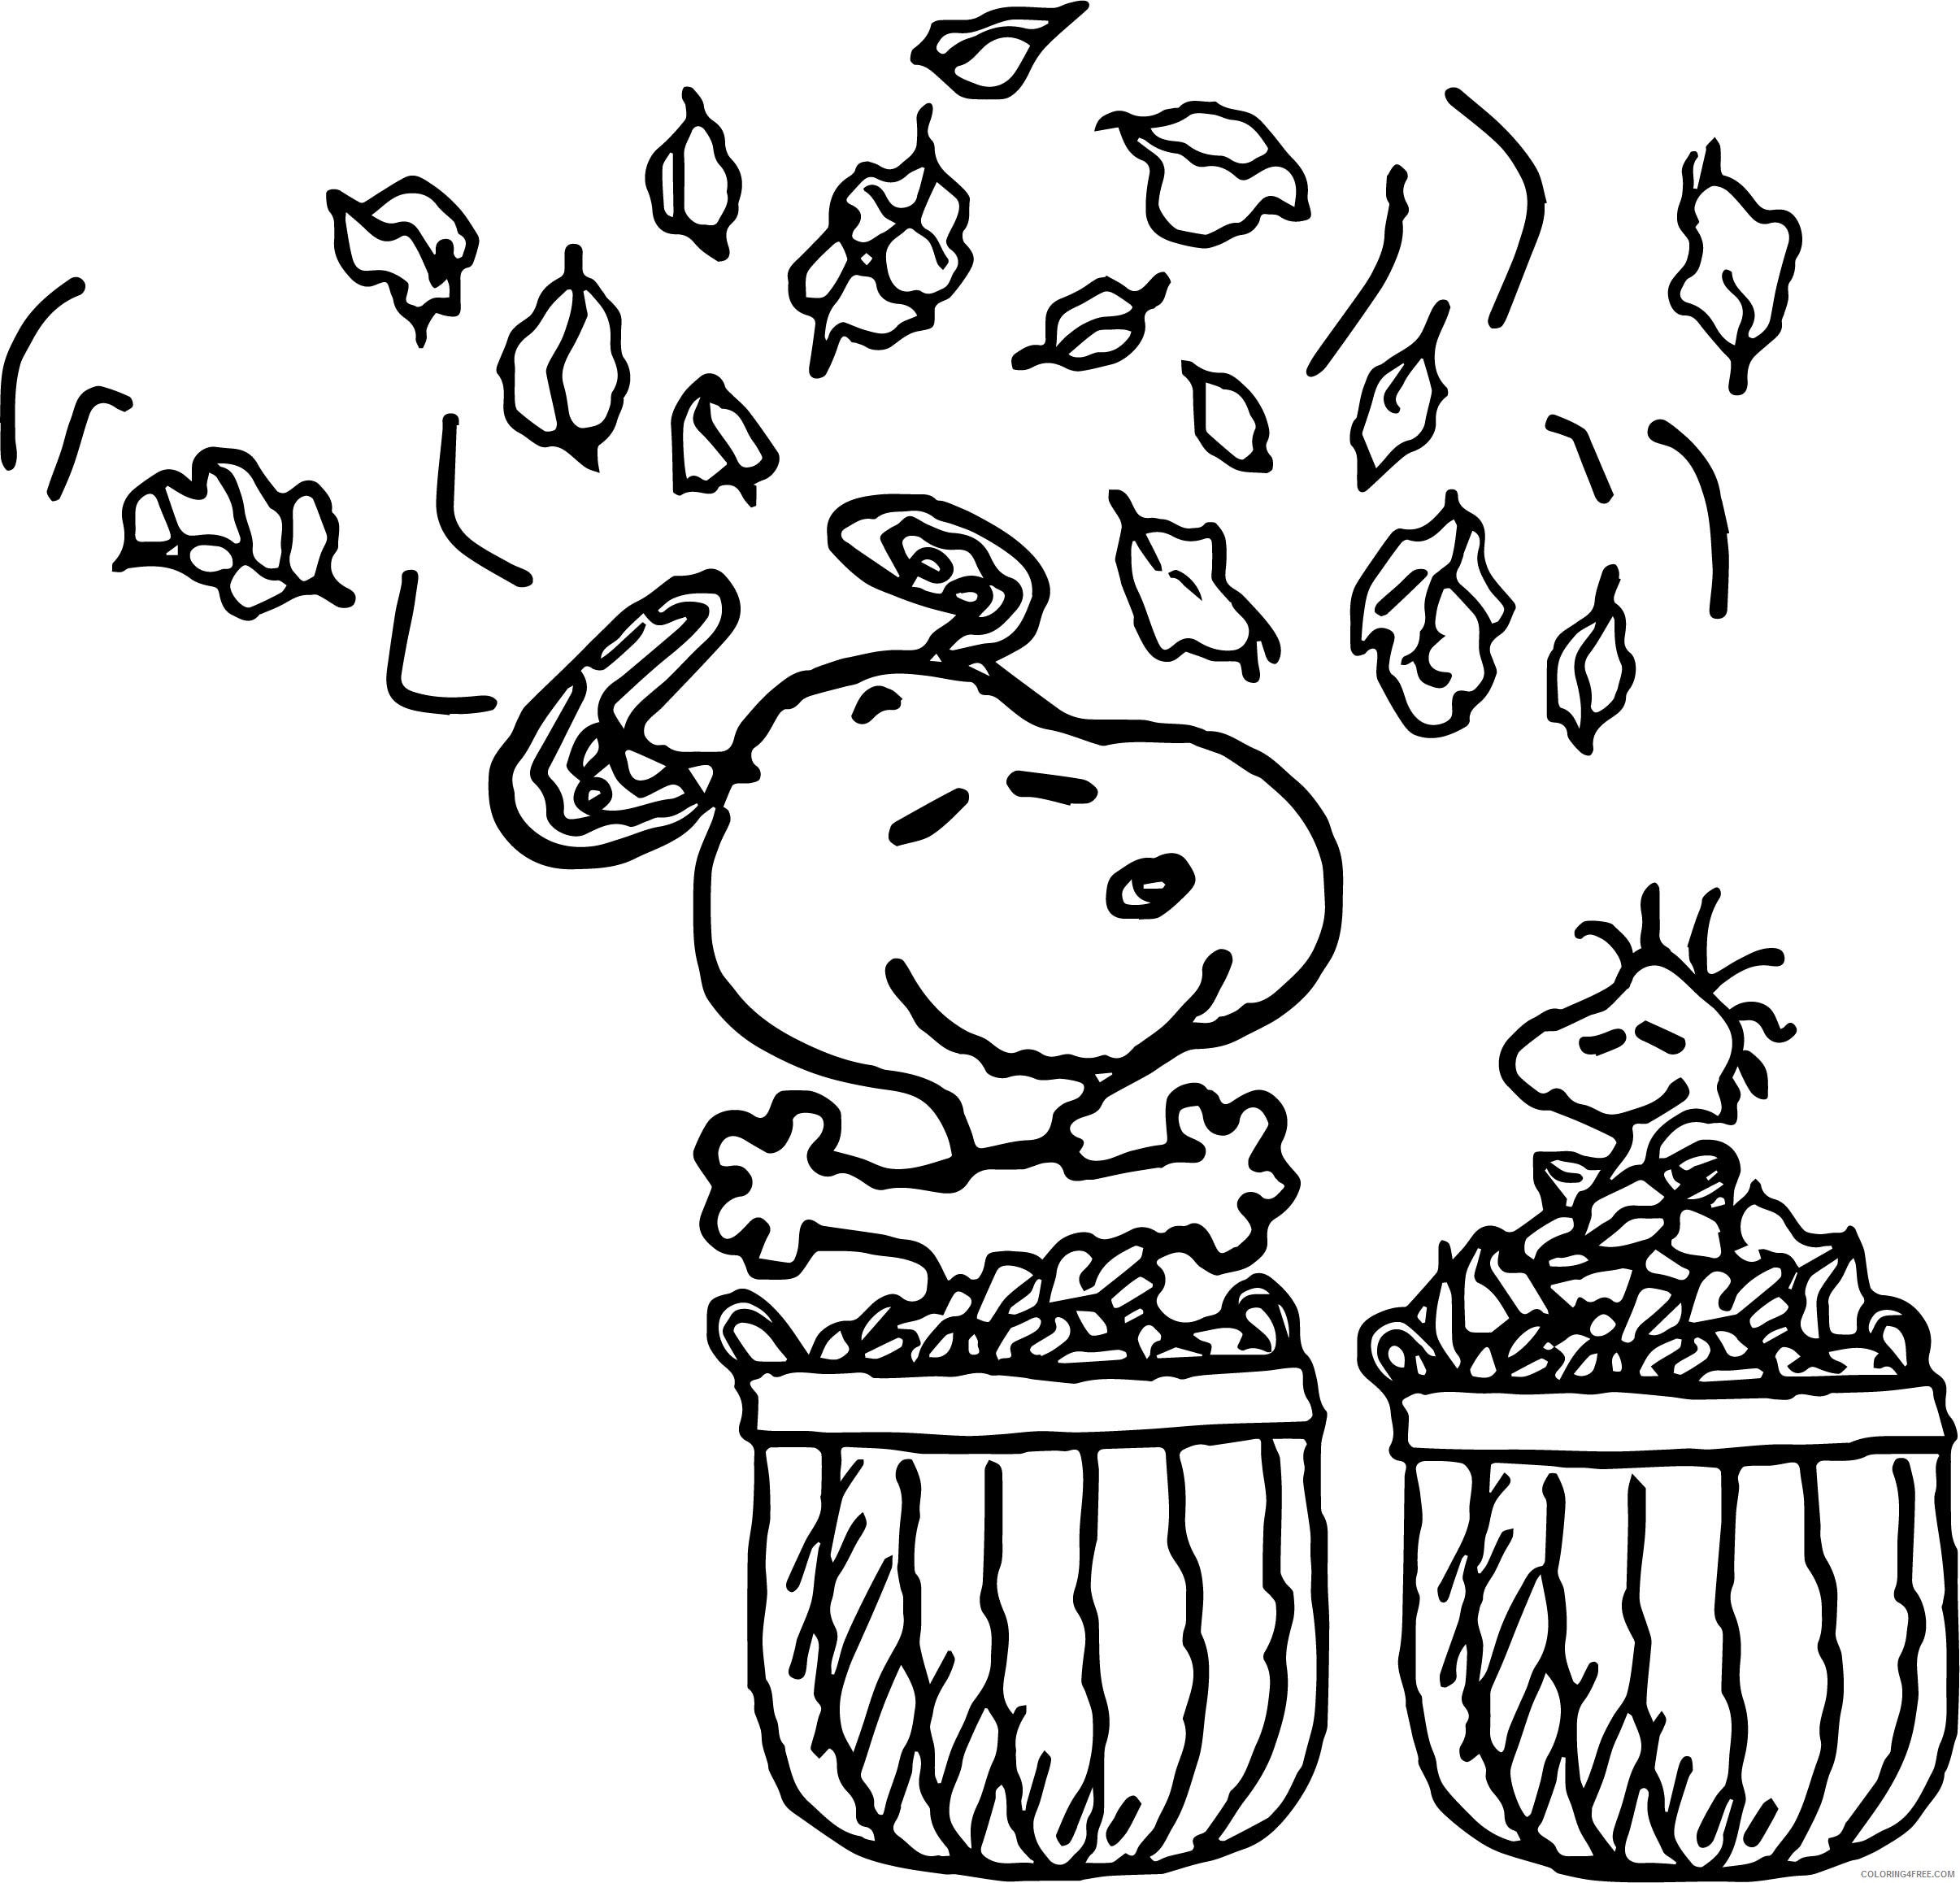 Snoopy Coloring Pages Cartoons Snoopy Fall Leaves Printable 5692 Coloring4free Coloring4free Com